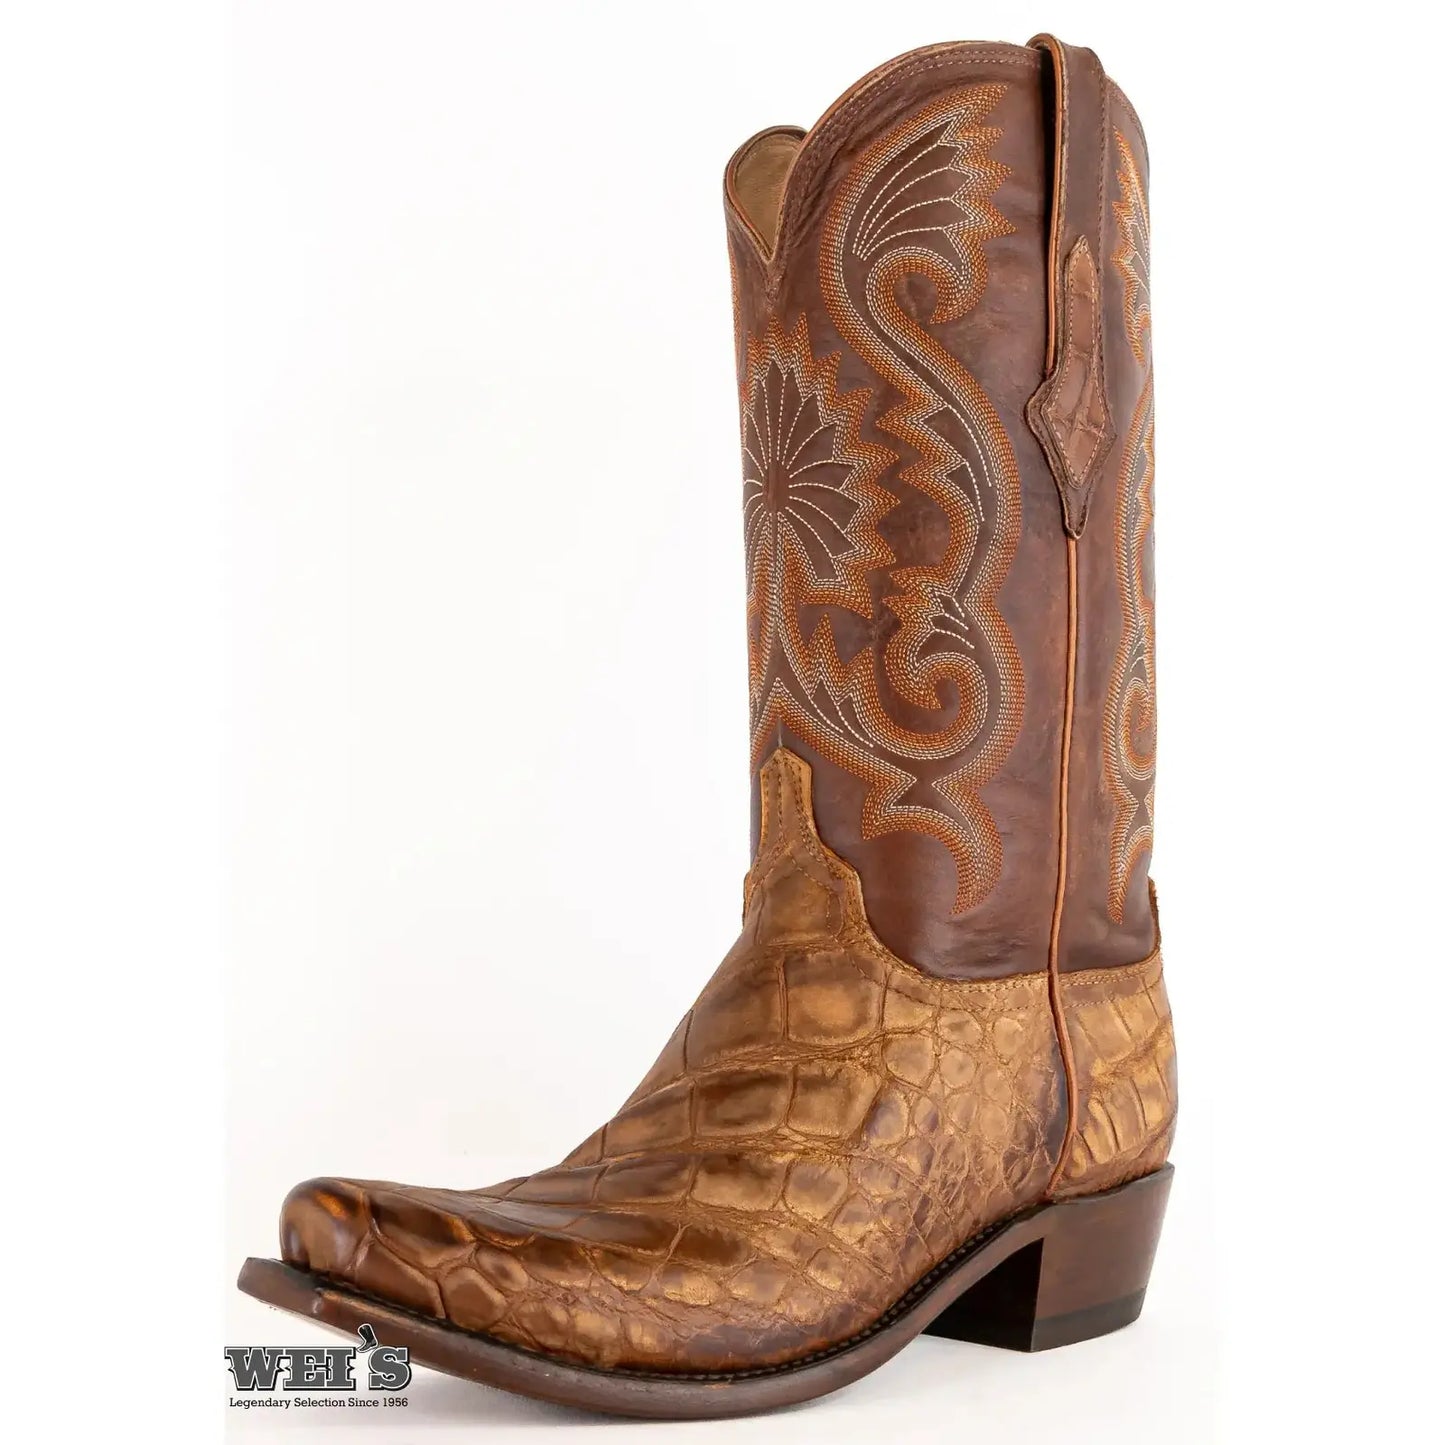 Lucchese Men's Cowboy Boots 14" Exotic Giant Gator Western Square Toe N1184.73